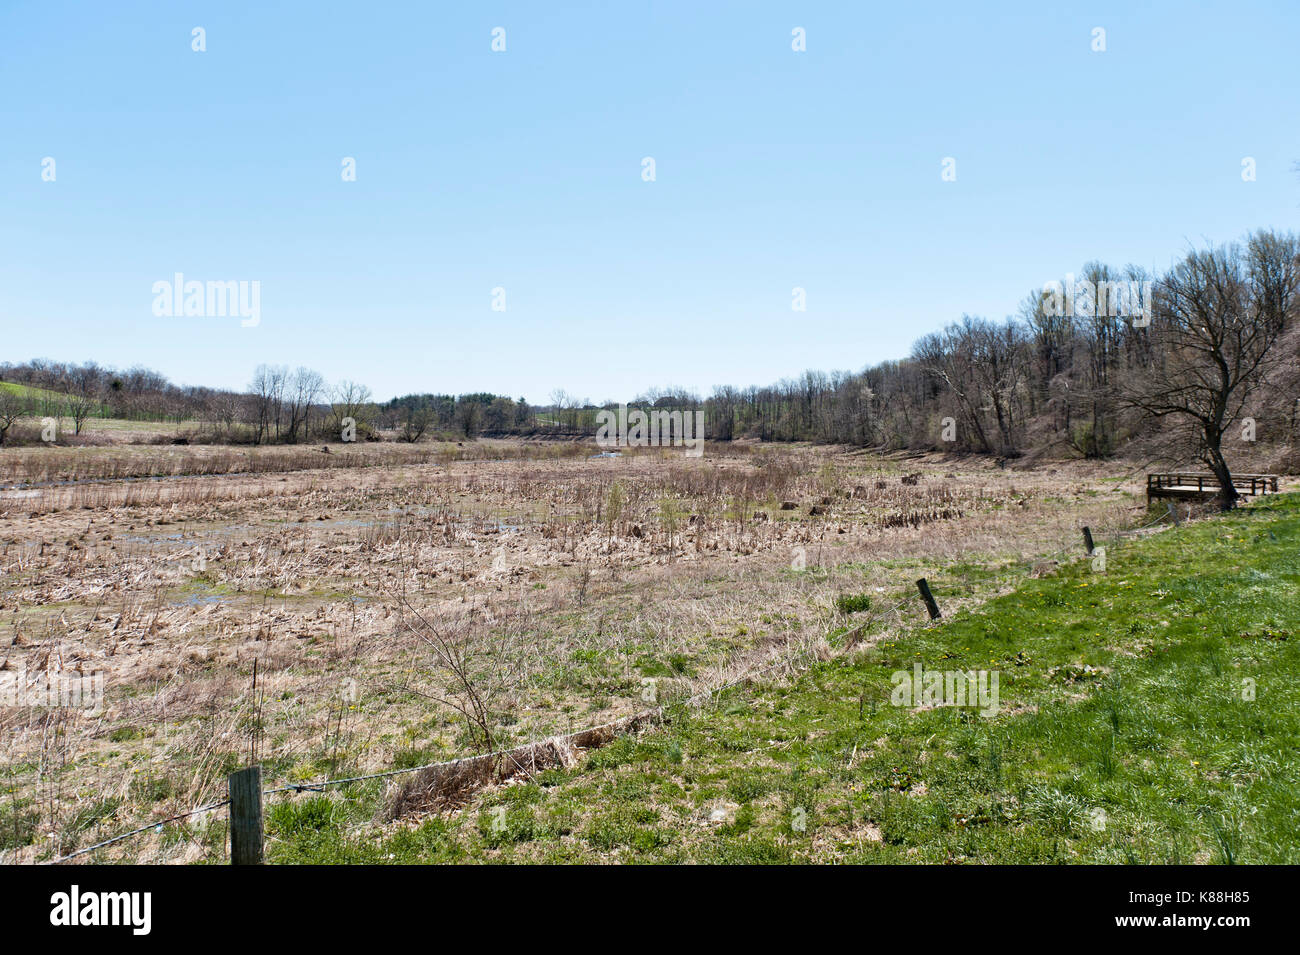 VIEW OF DRY LAKE BED AND FISH HABITAT STRUCTURES AT THE LOWER END OF SPEEDWELL FORGE LAKE AFTER DRAINING DUE TO DAM DAMAGE, LITITZ PENNSYLVANIA Stock Photo